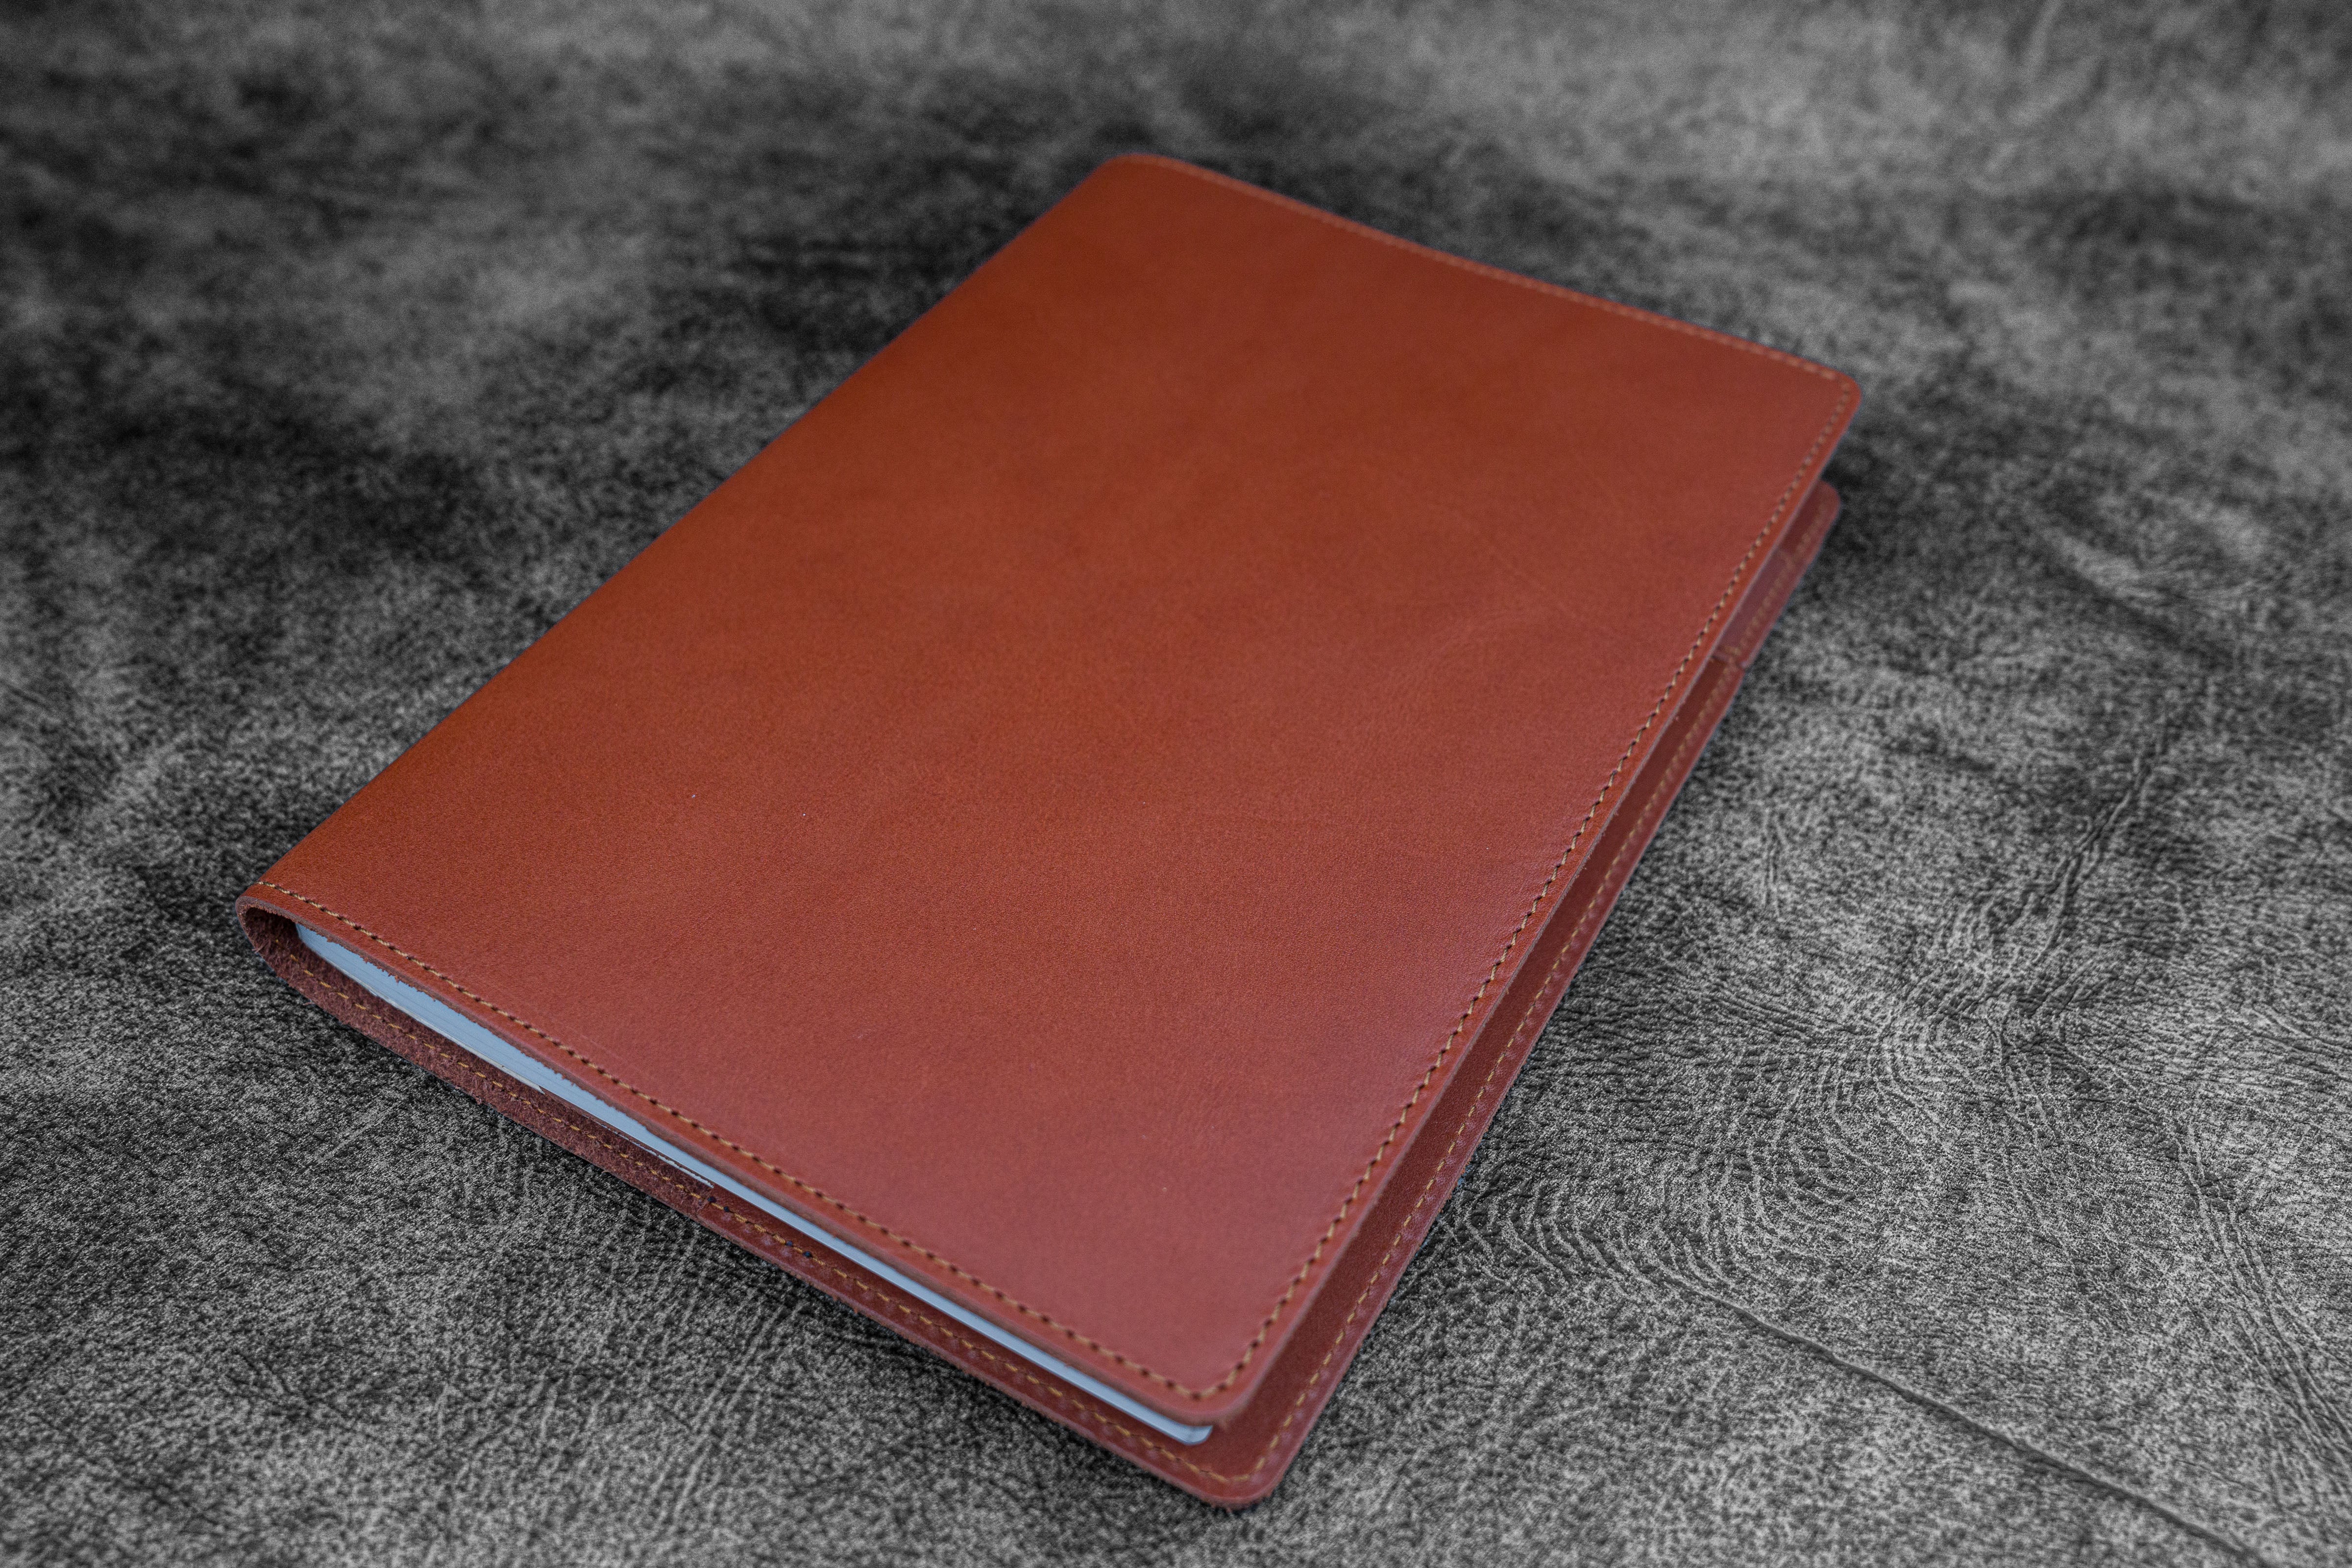 Leather Remarkable 2 Case / Leather Remarkable 2 Cover / B5 Notebook Folio  / Organizer for B5 Notebook / Engraved Drawing Tablet 